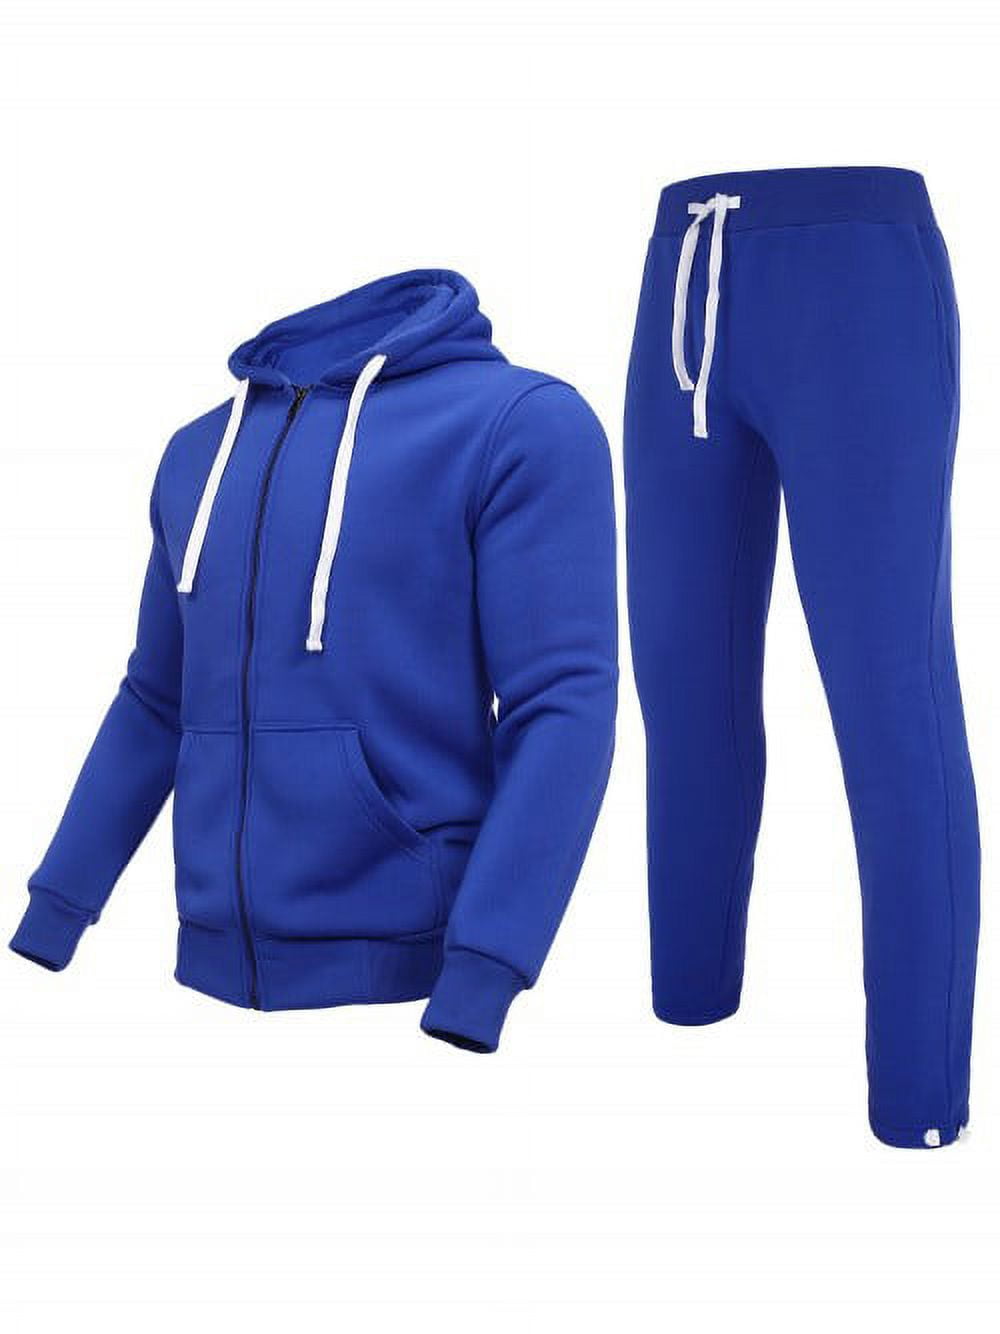 Tracksuit Men's Athletic Sweatsuits Casual Outfit for Men Fleece Hoodie  Sweatshirt Sweatpants Big and Tall Jogging Suits Sets 2 pieces(M blue,3XL)  